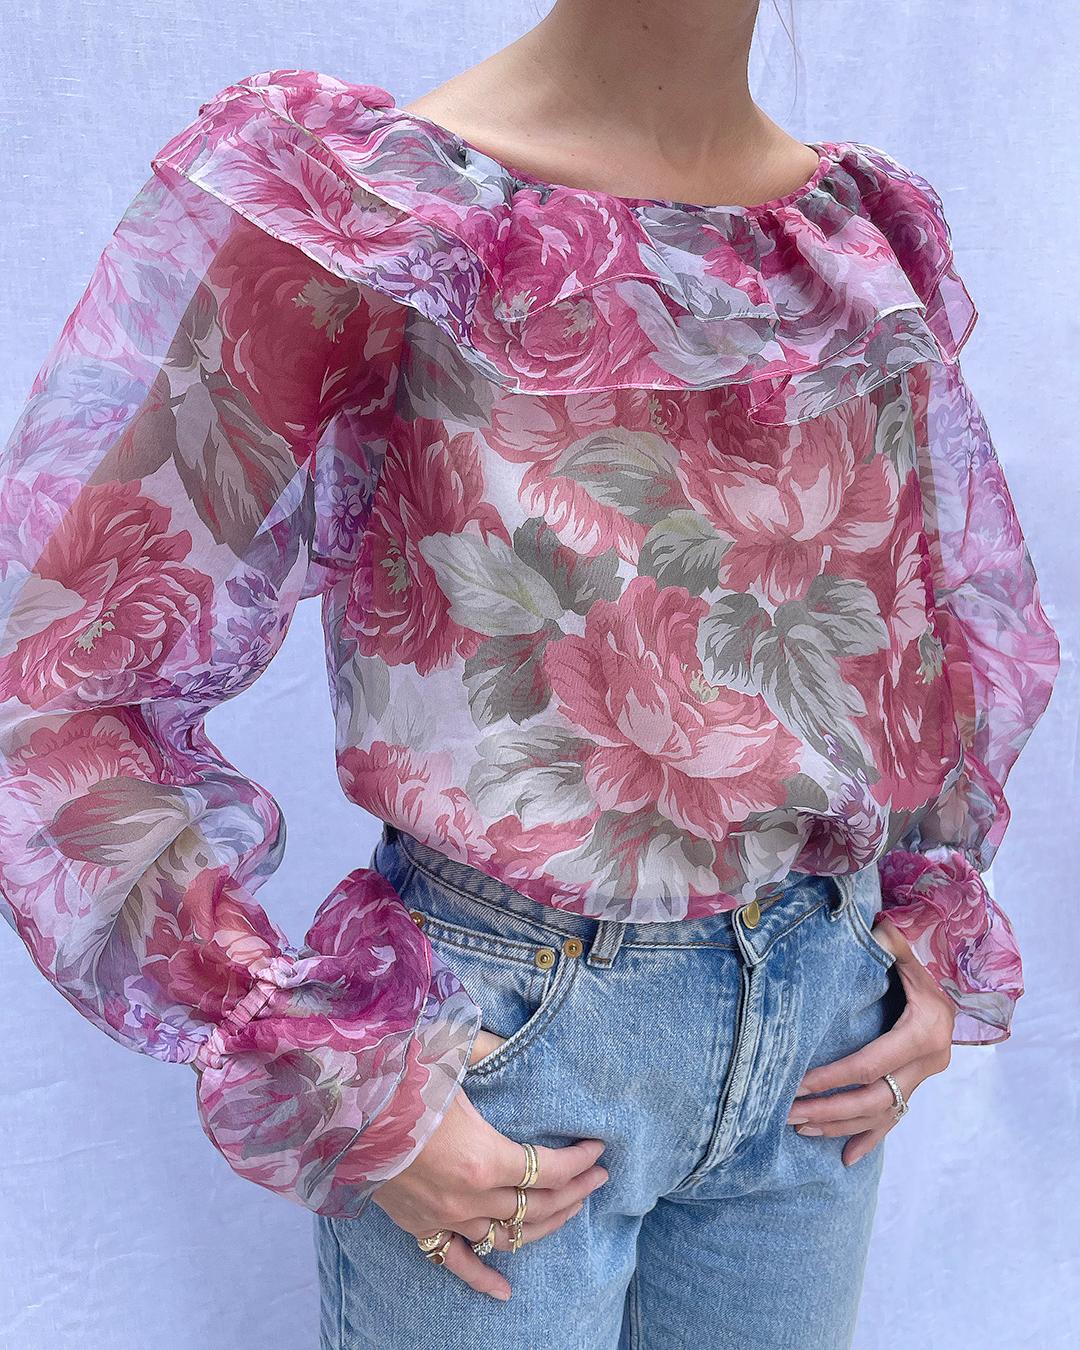 Vintage 1980s Hanae Mori Floral Blouse: This blouse was made in the 1980s by Hanae Mori, the legendary Japanese designer whose east-meets-west approach to fashion design influenced an entire generation of designers who followed her, and earned her